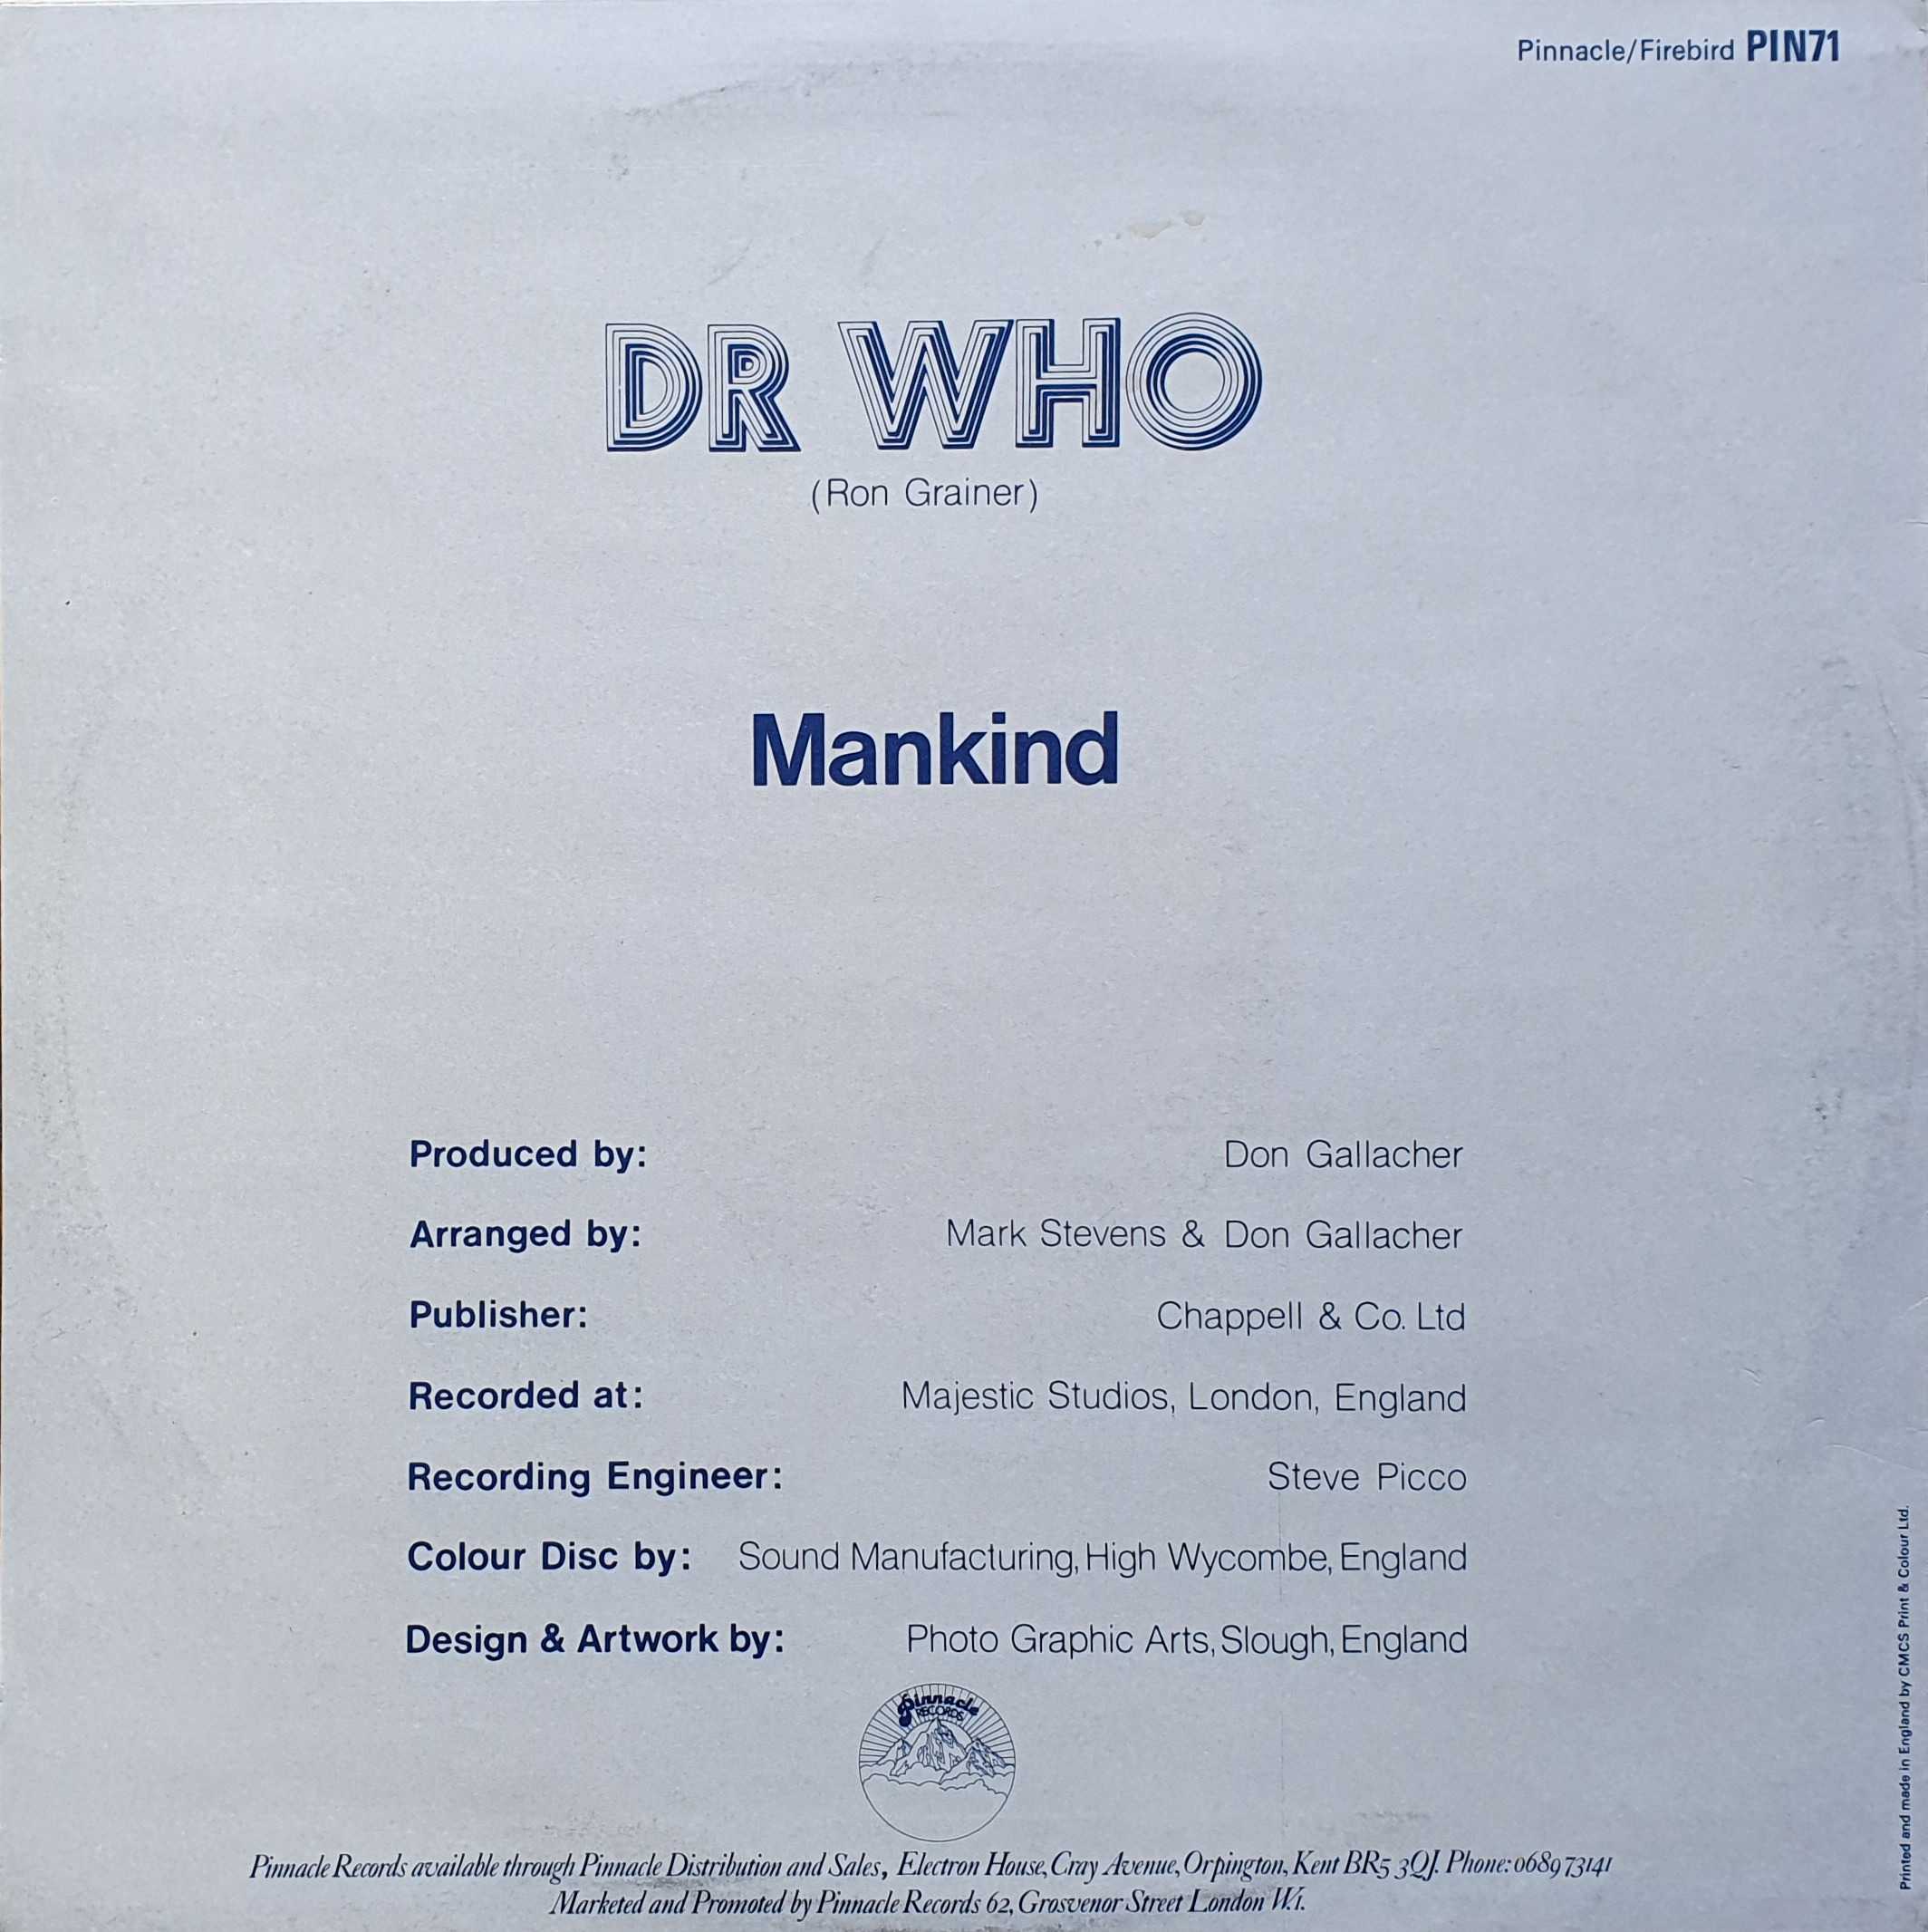 Picture of PIN 71-12 B Doctor Who (Cosmic remix) by artist Ron Grainer / Mark Stevens / Mankind from the BBC records and Tapes library